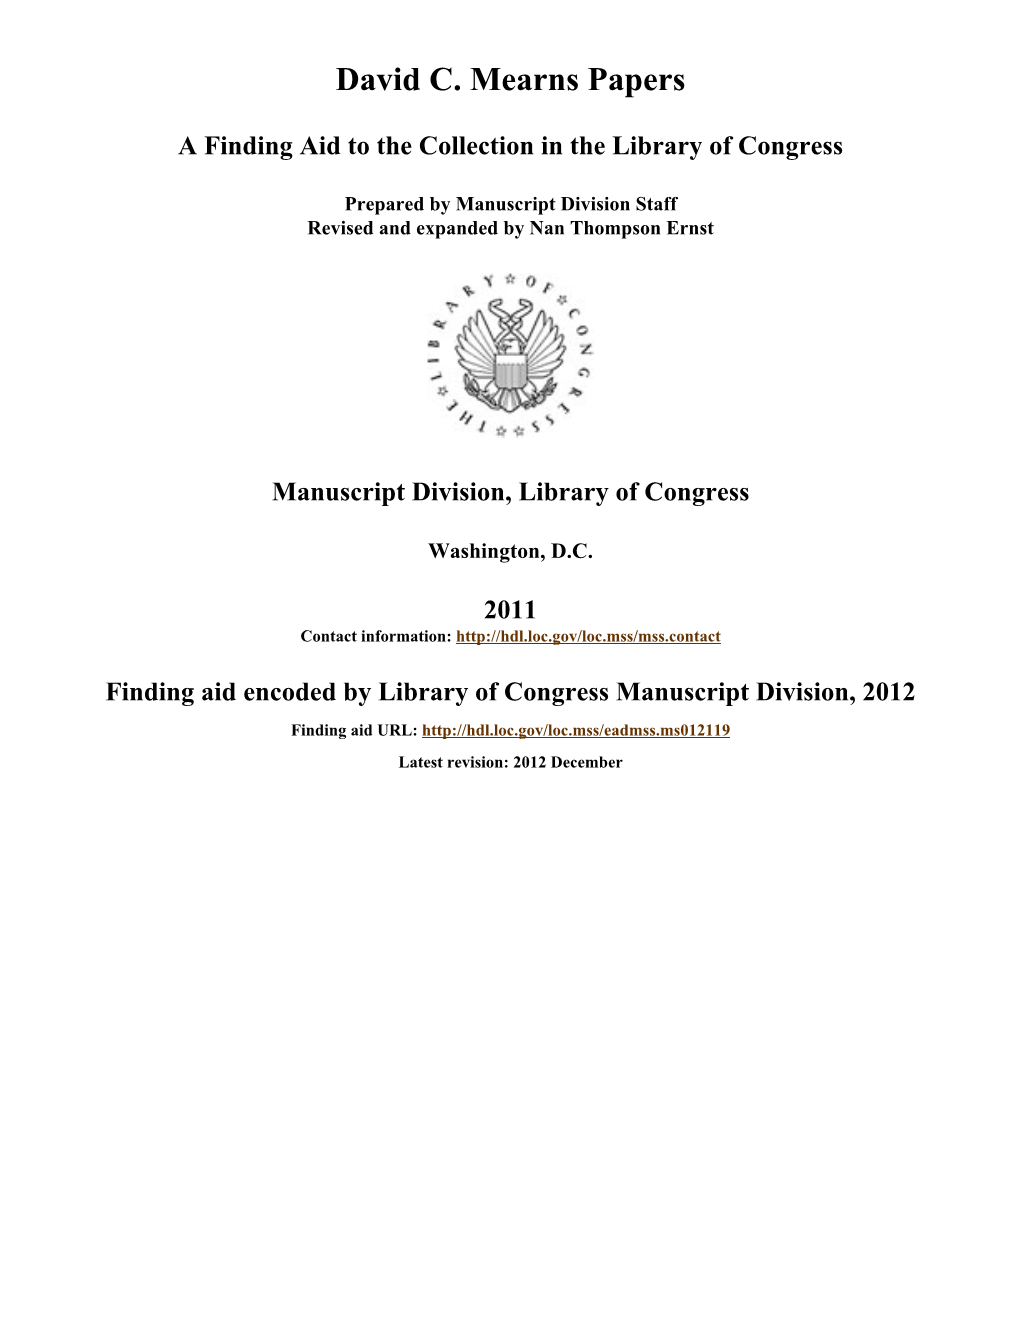 David C. Mearns Papers [Finding Aid]. Library of Congress. [PDF Rendered